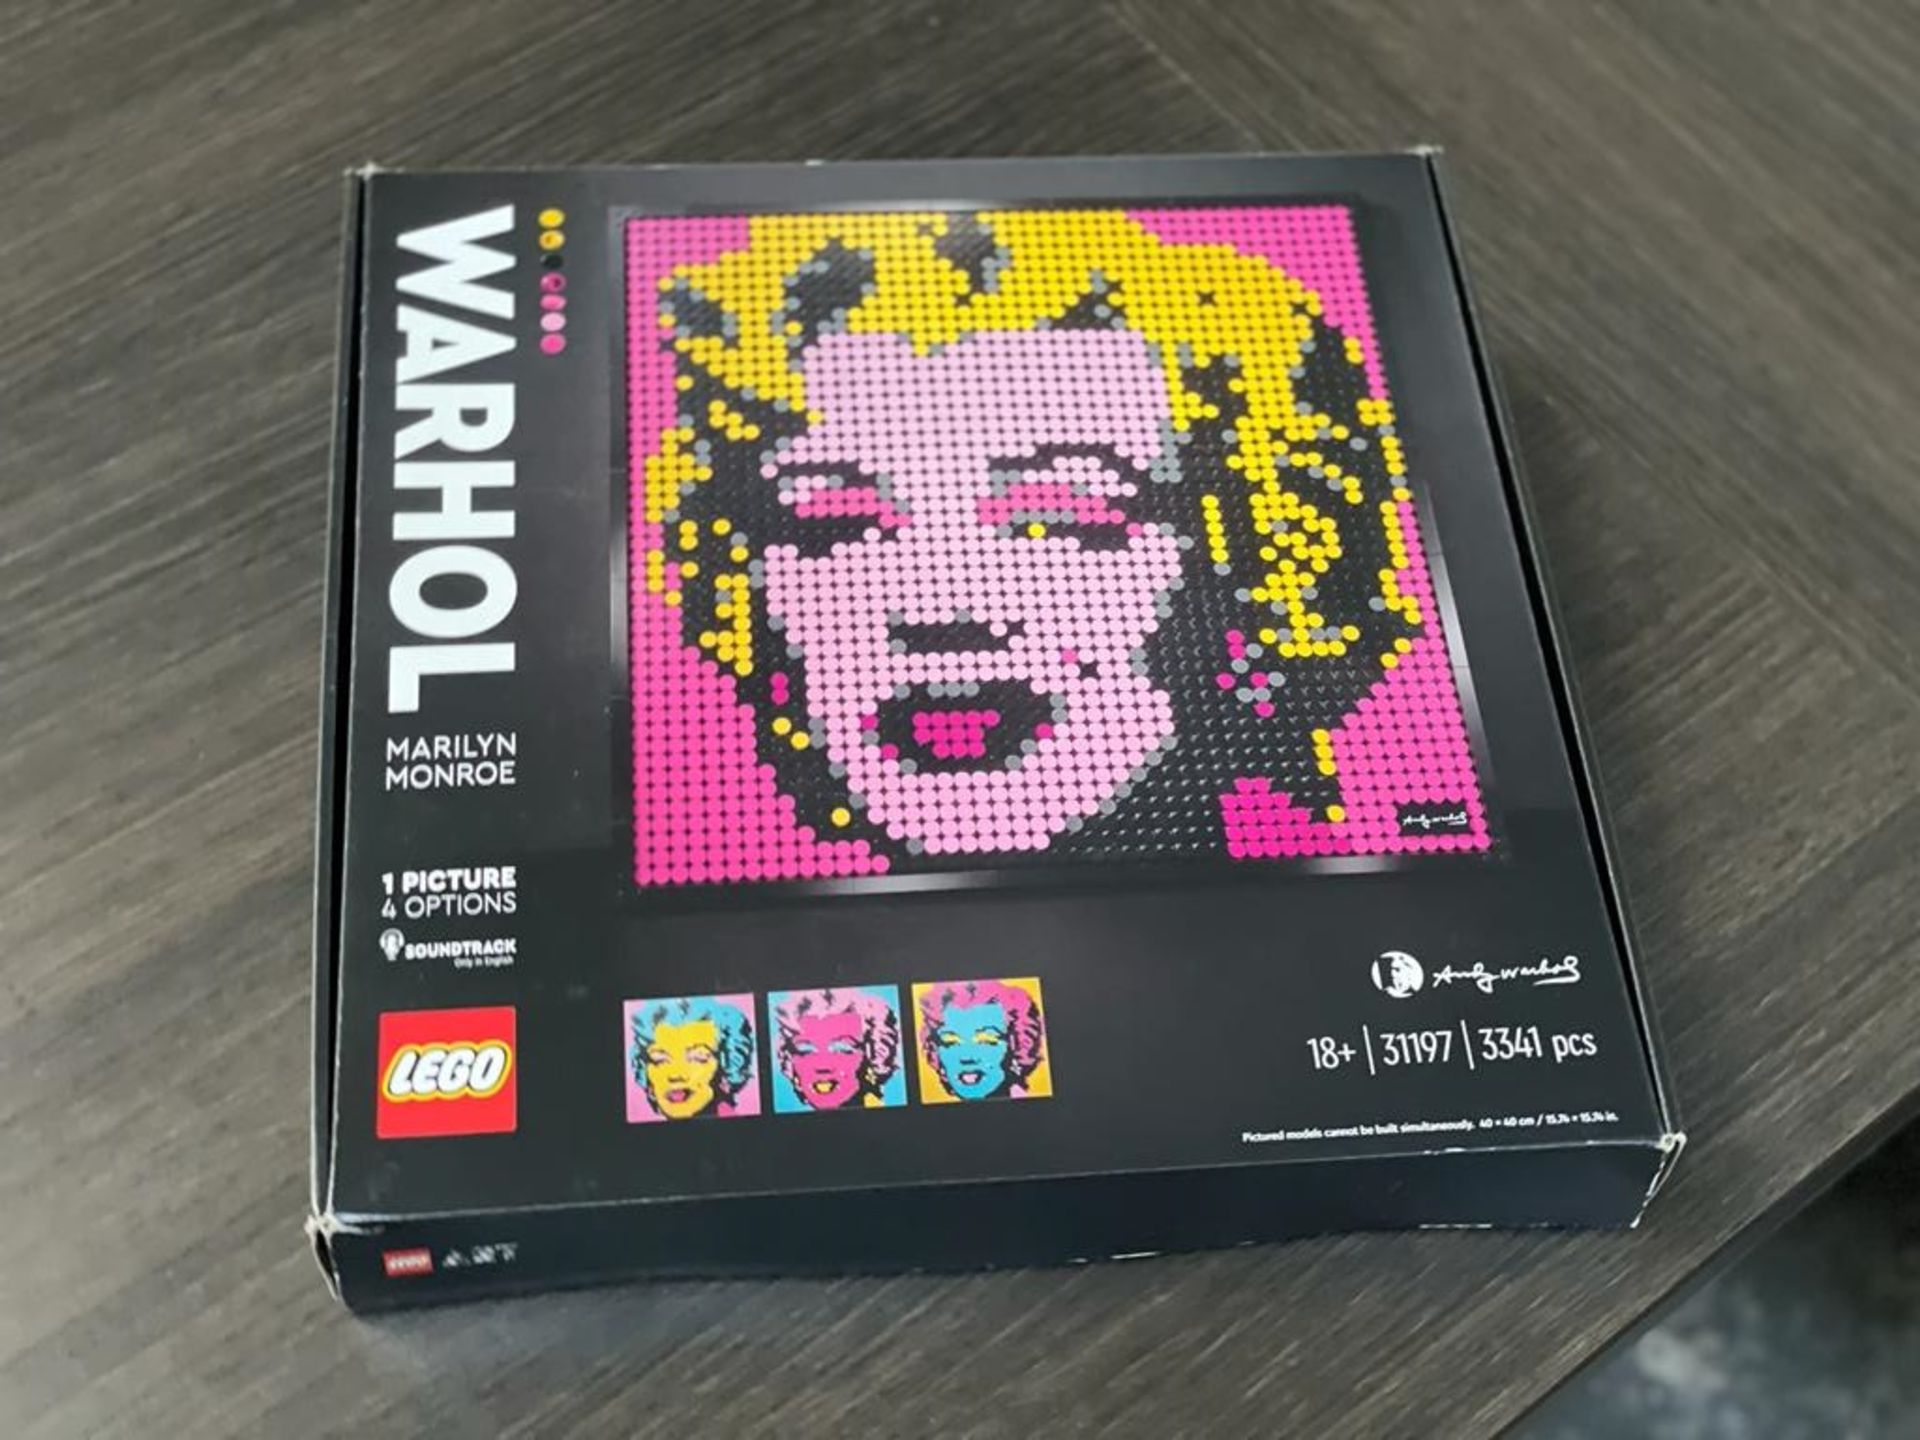 1 x Lego Art 31197 Andy Warhol's Marilyn Monroe set - Brand New RRP £90.00 - CL987 - Ref: - Image 3 of 3